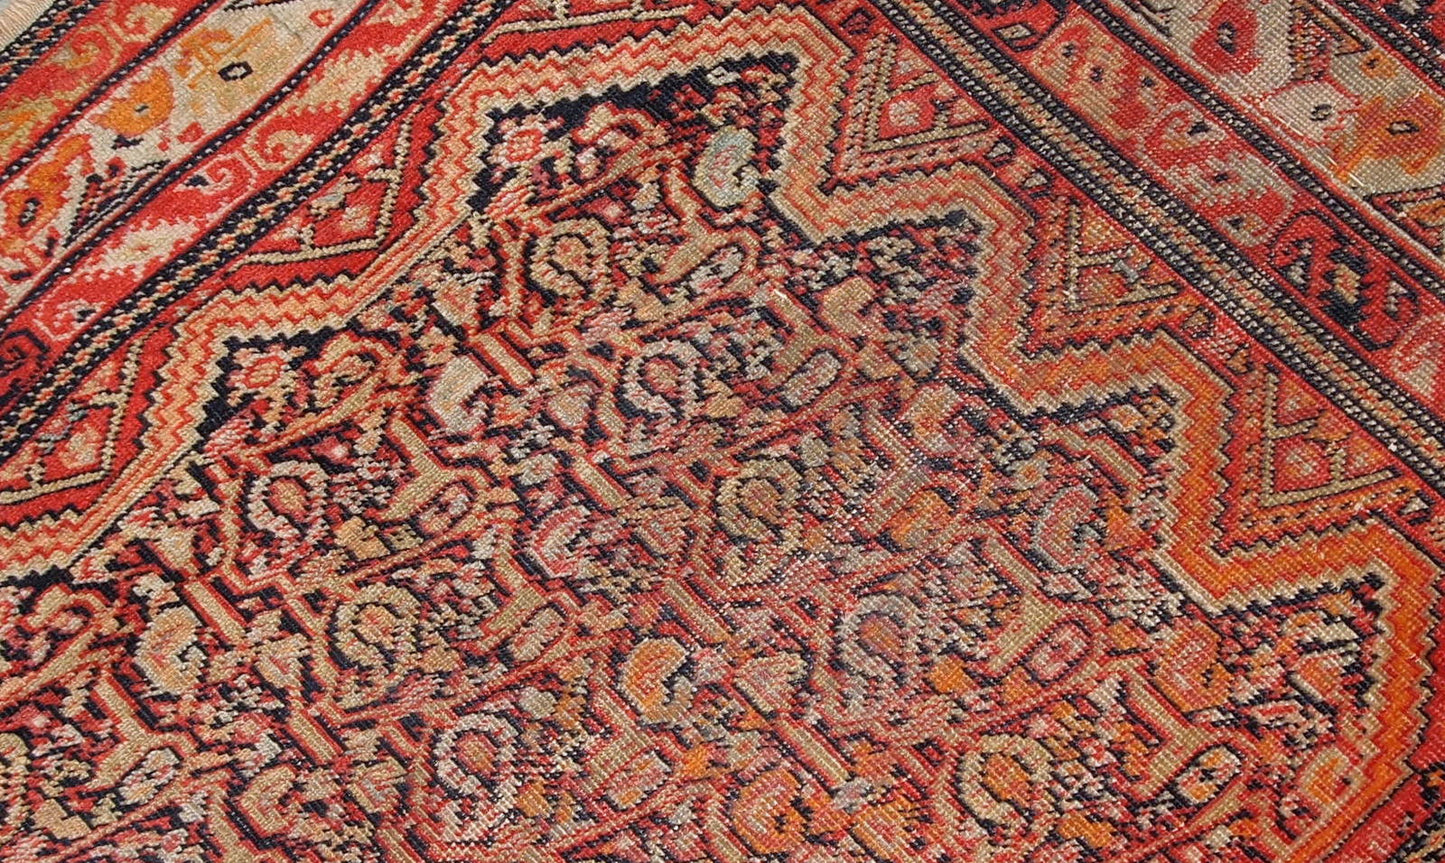 Handmade antique collectible Persian Mishan Malayer rug. This fine-weaved rug made in the end of 19th century and it is in original good condition, it has some low pile.